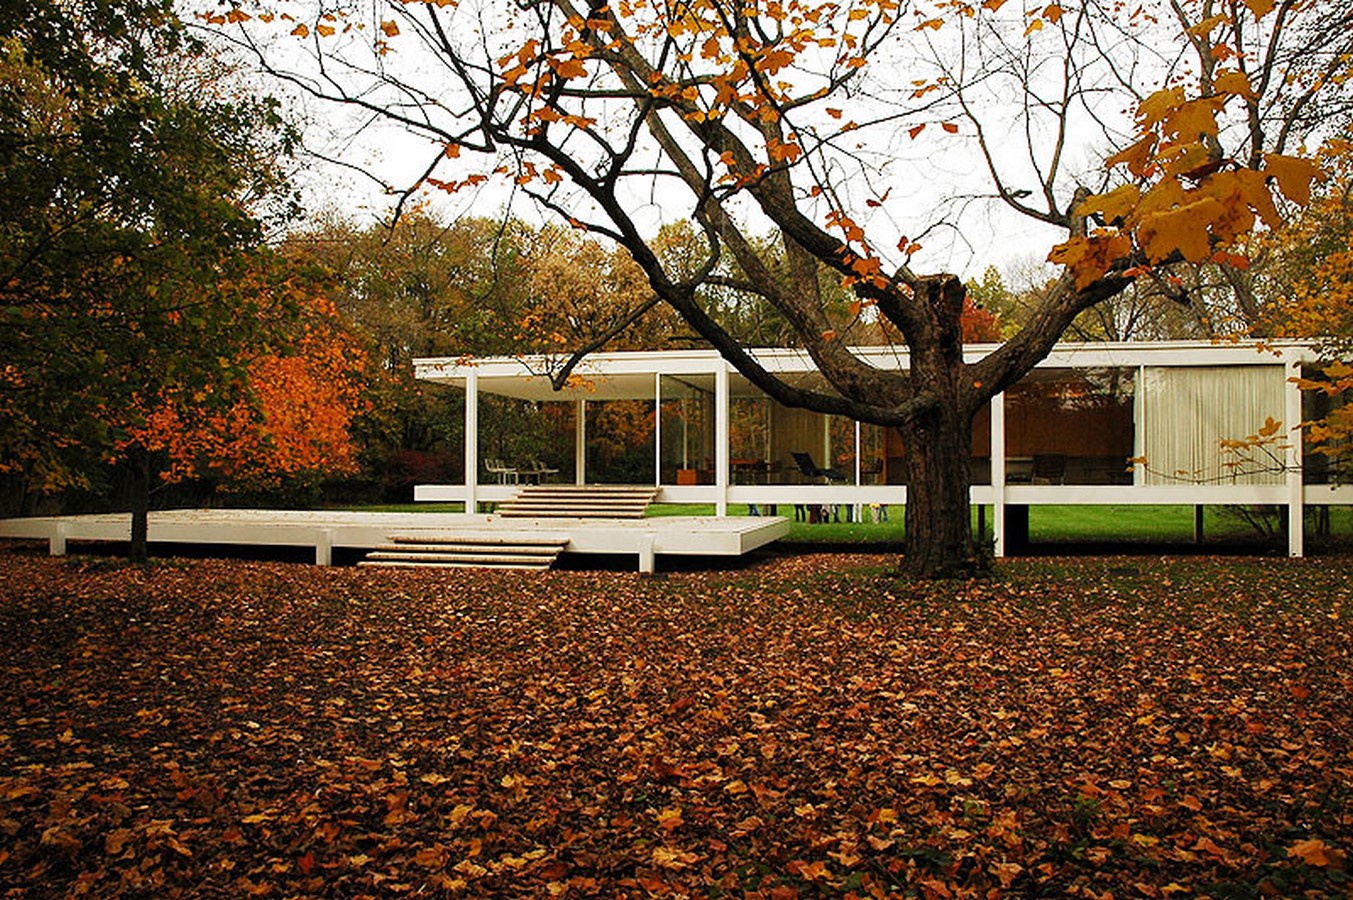 Farnsworth House by Mies van der Rohe: A bond between the House and Nature - Sheet1